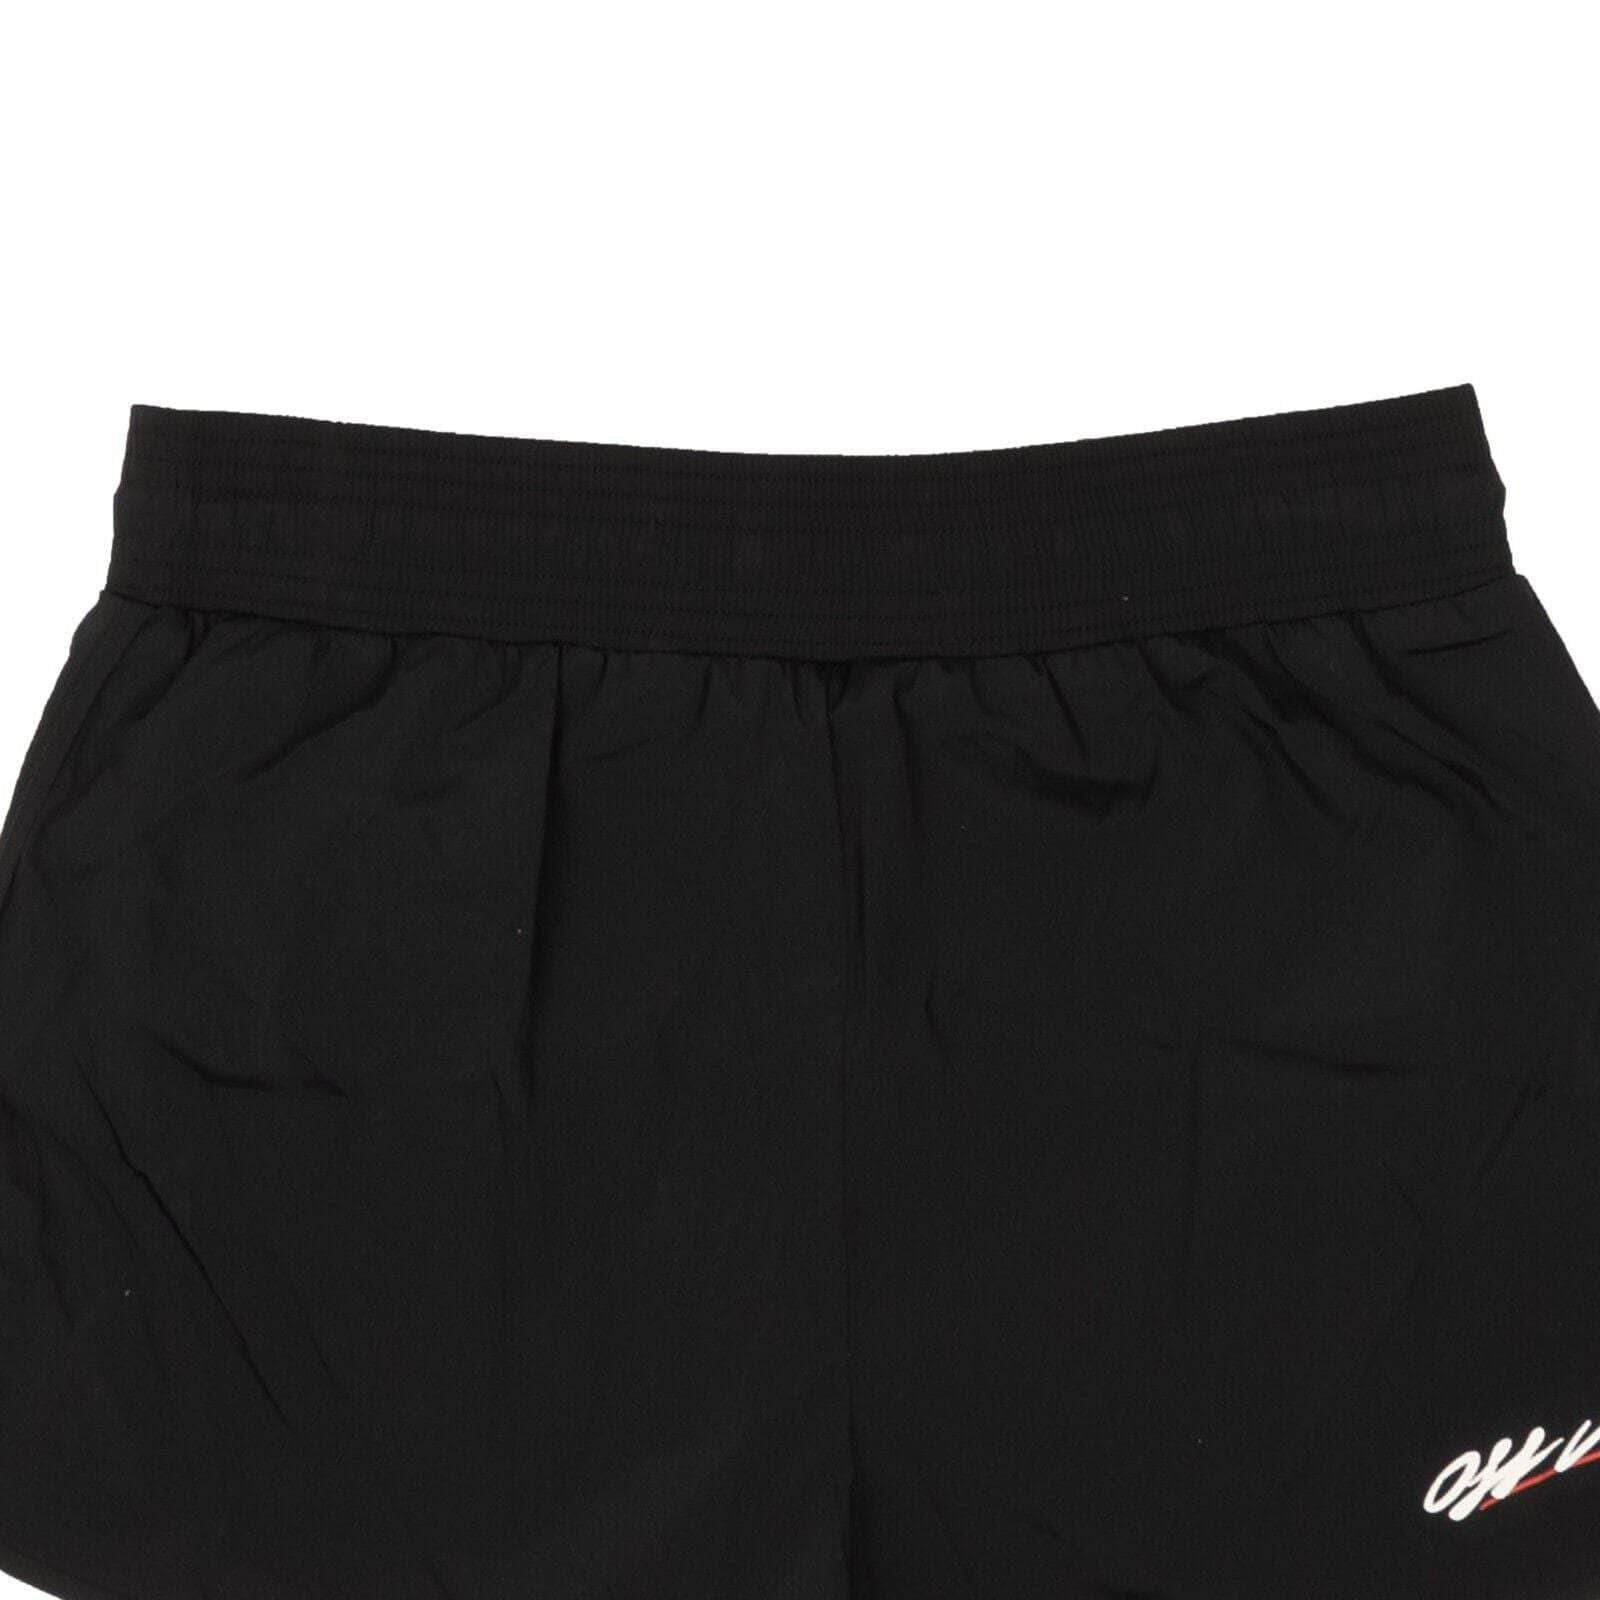 Off-White c/o Virgil Abloh 250-500, channelenable-all, chicmi, couponcollection, gender-womens, main-clothing, off-white-c-o-virgil-abloh, size-m M Black Athleisure Running Shorts OFW-XBTM-0023/M OFW-XBTM-0023/M